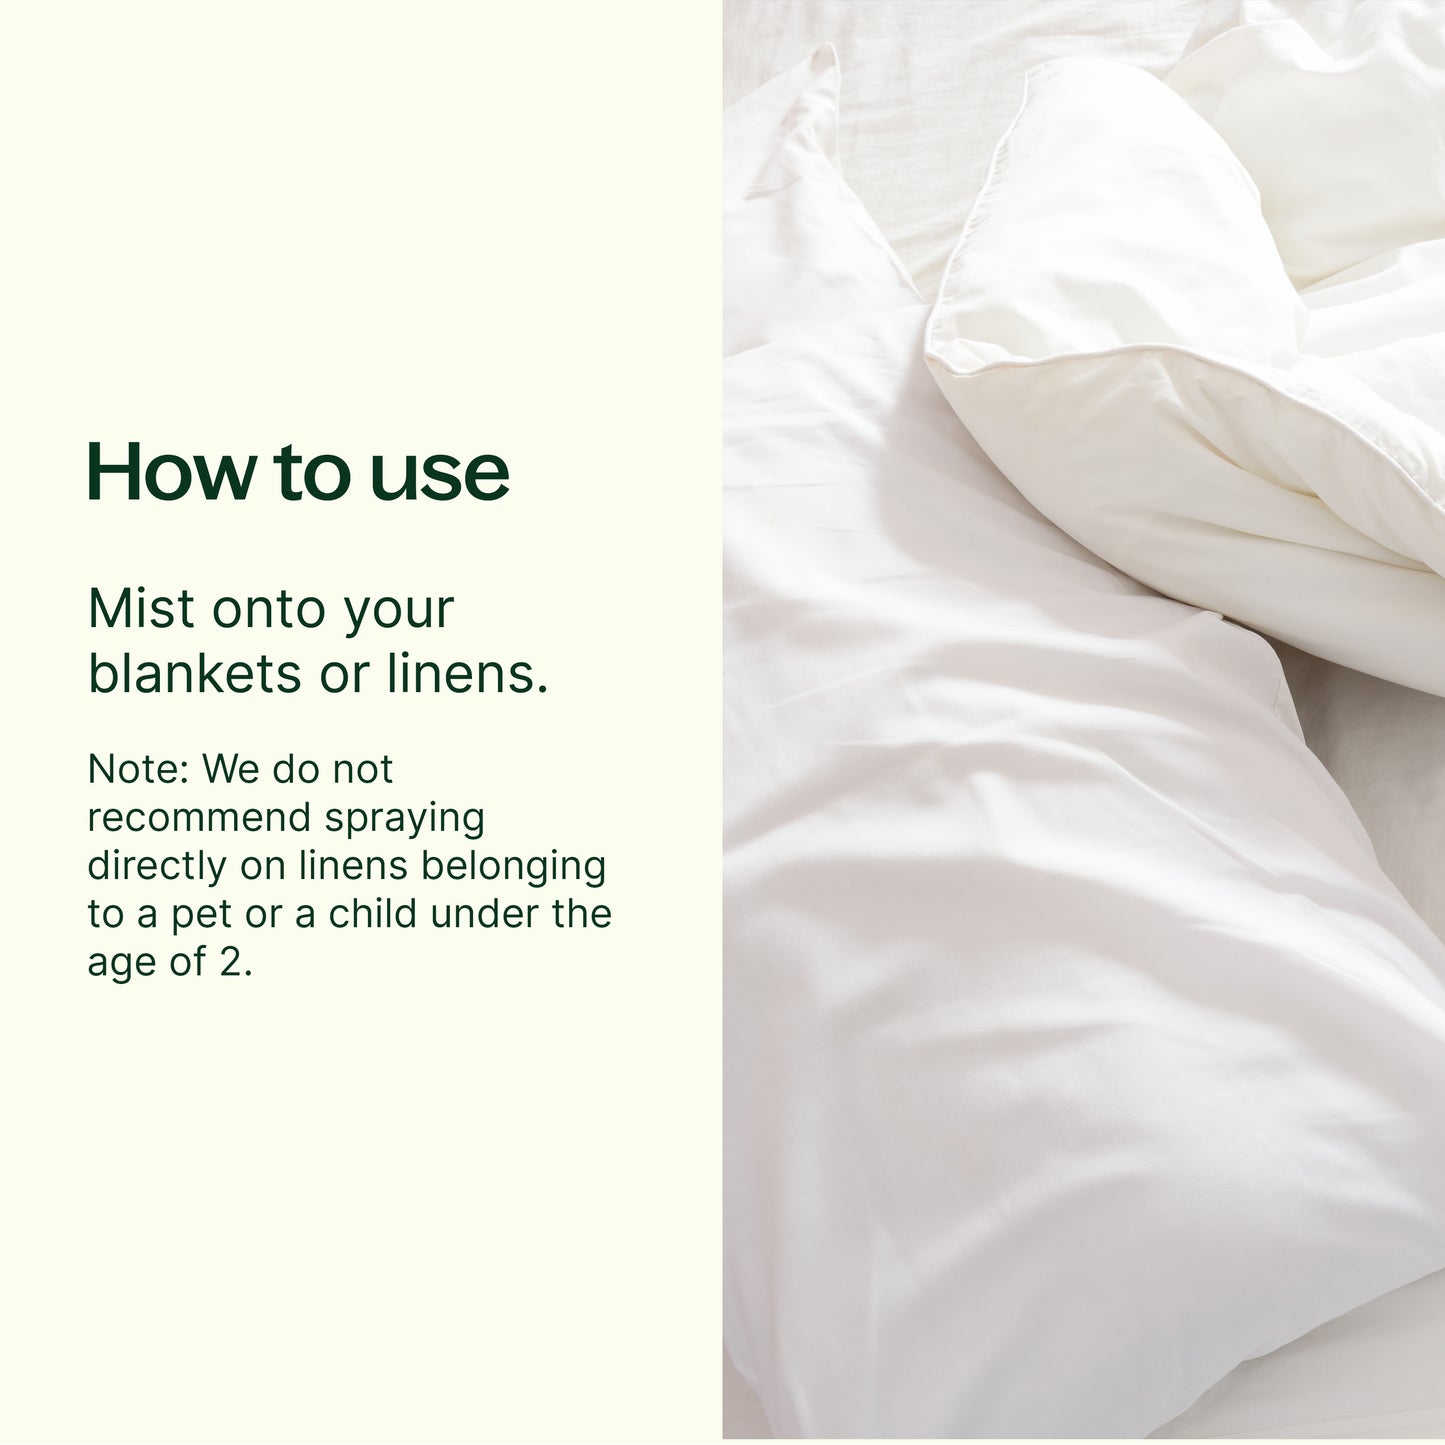 how to use; mist onto your blankets or linens. Note: we do not recommend spraying directly on linens belonging to  a pet or child under the age of 2. 